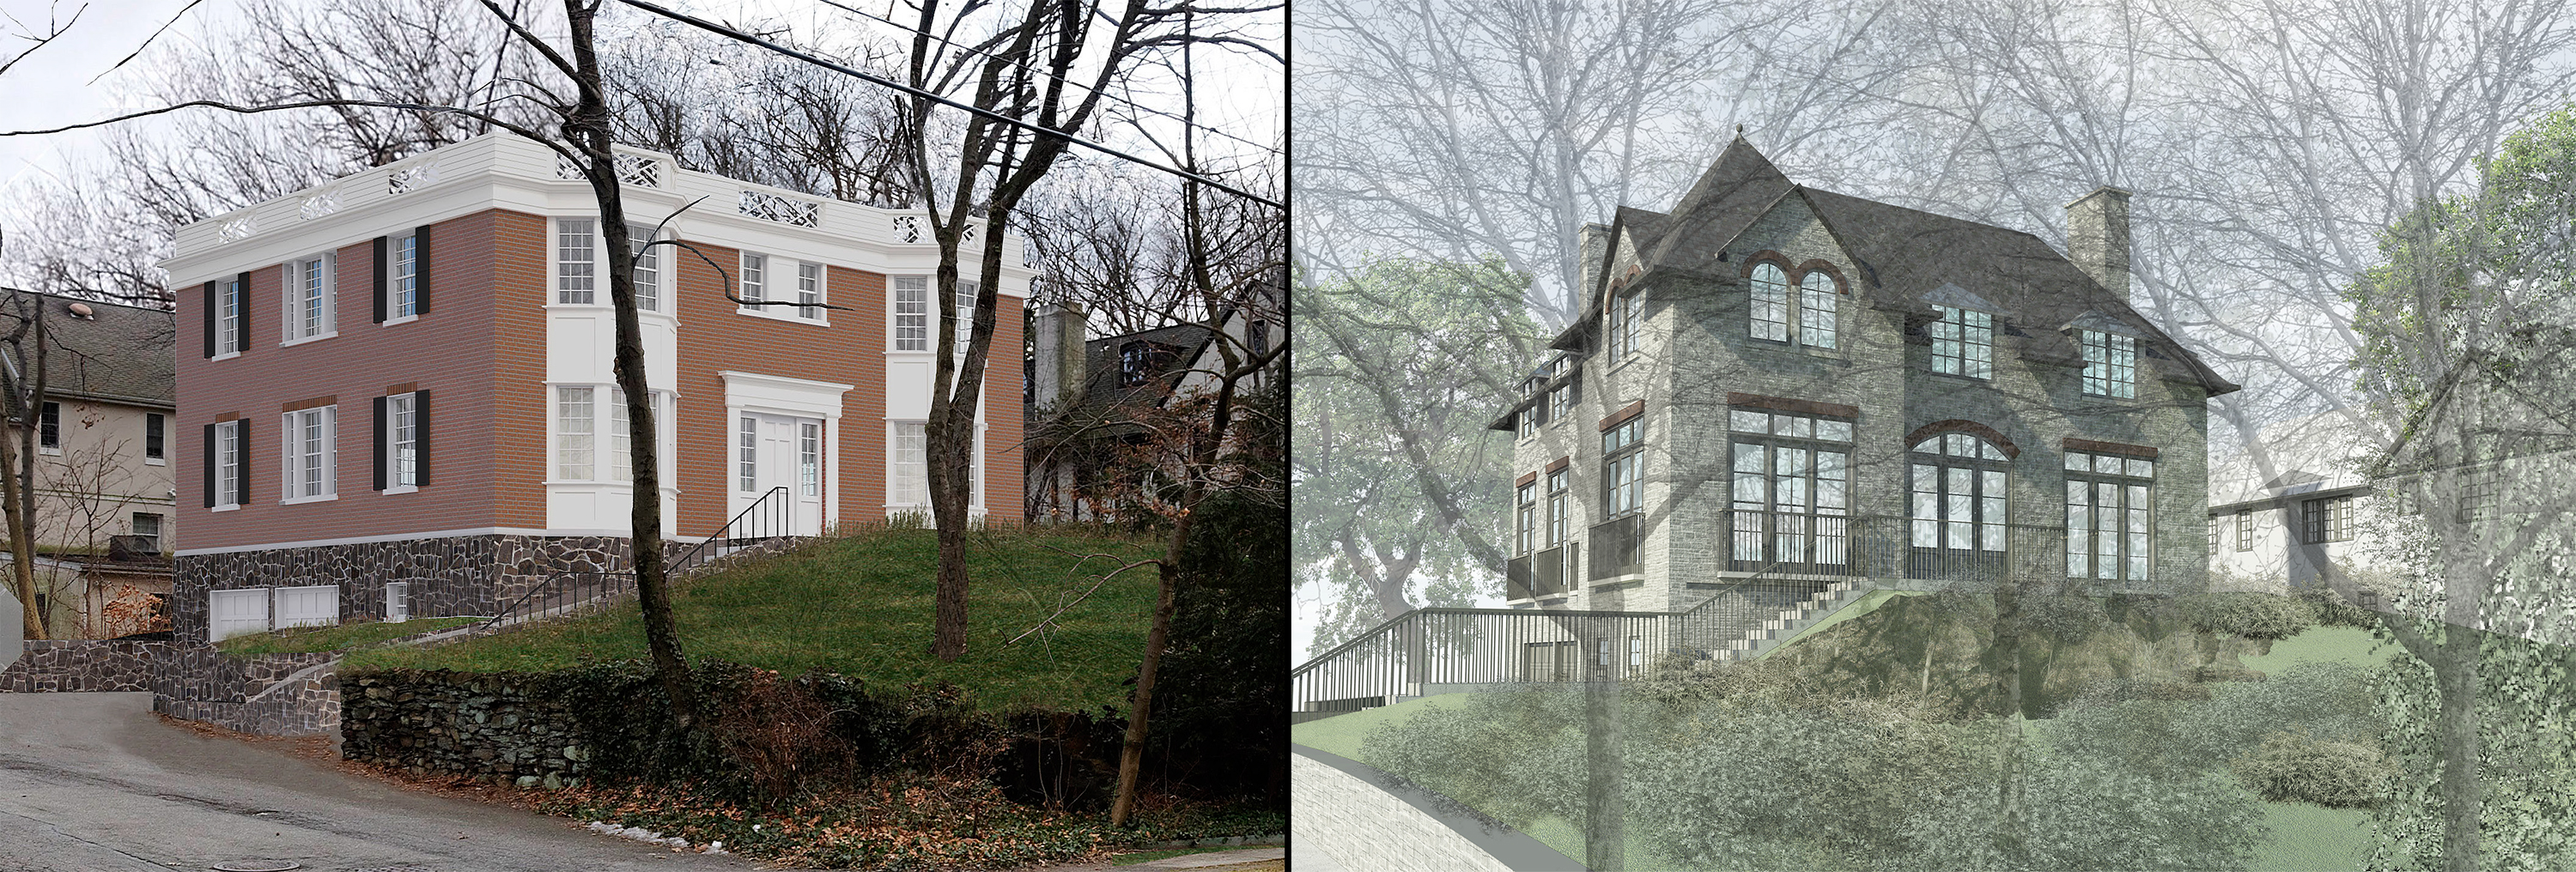 Previous and revised proposals for new house no. 3, as viewed from Fieldston Road